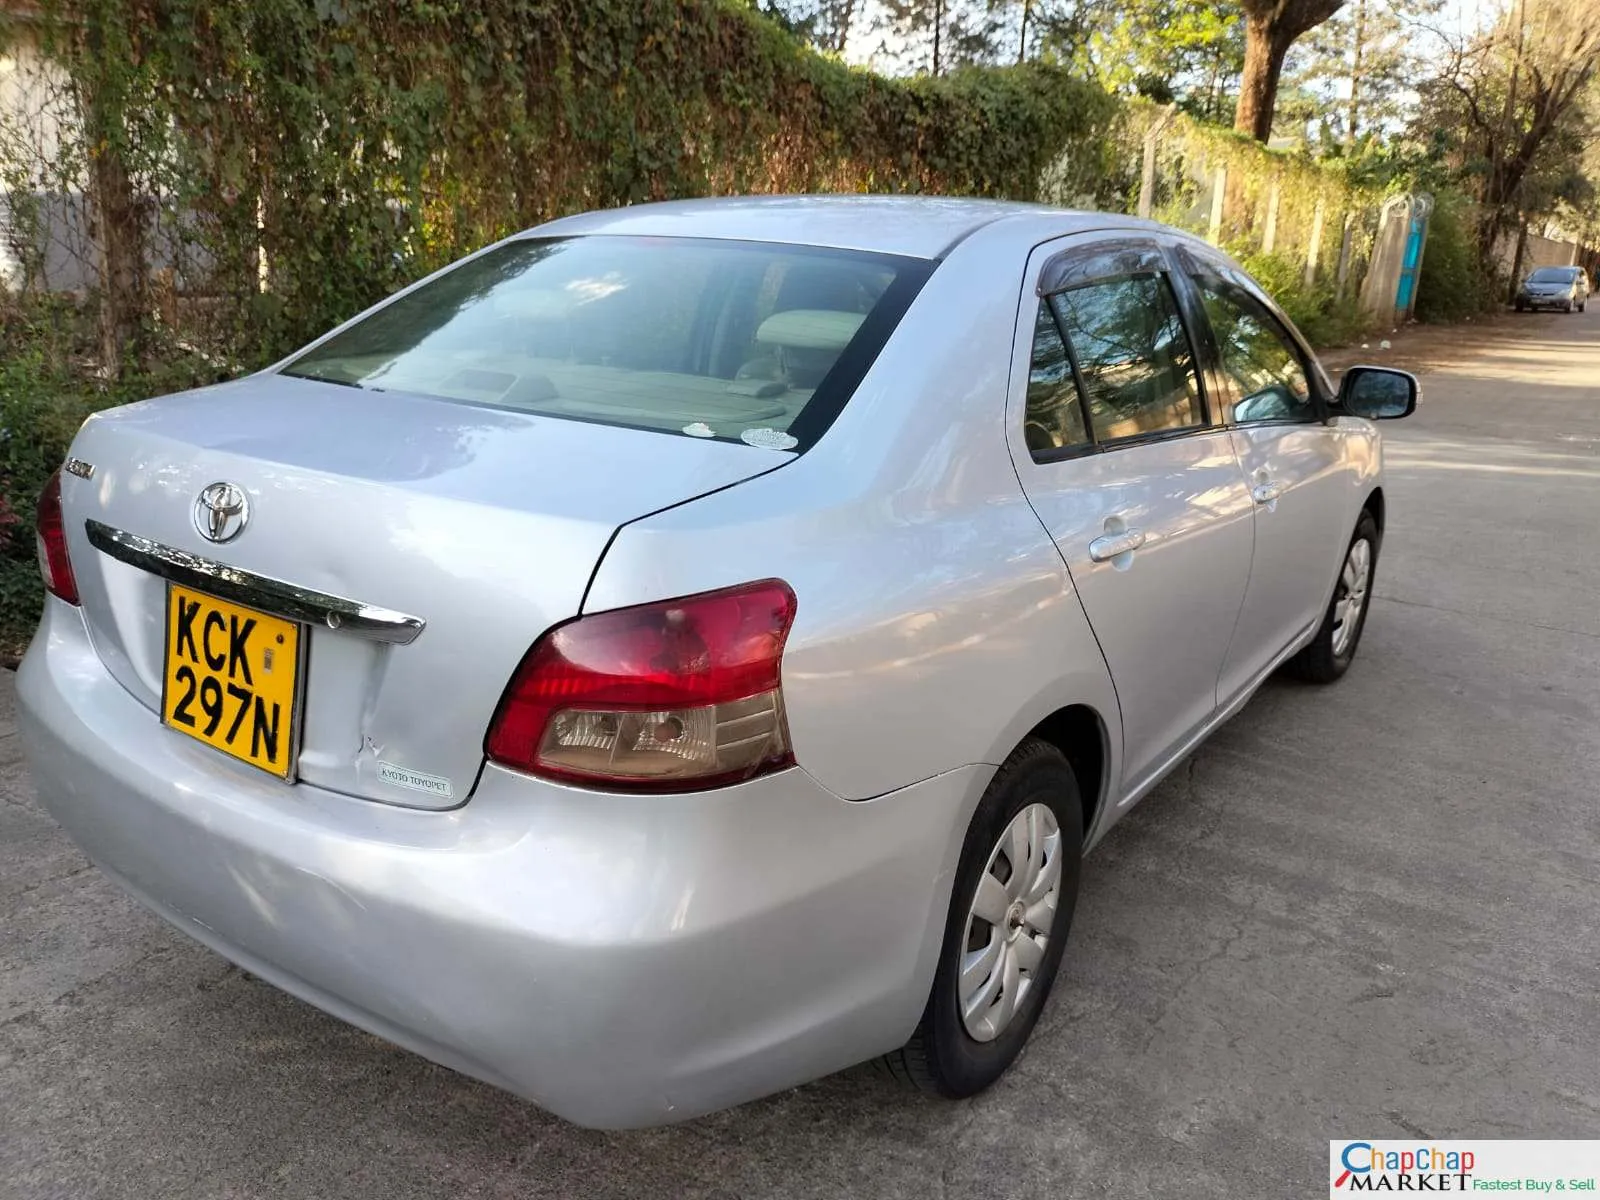 Cars Cars For Sale-Toyota BELTA kenya 1300cc ONLY You Pay 30% Deposit Trade in OK EXCLUSIVE belta for sale in kenya hire purchase installments 7